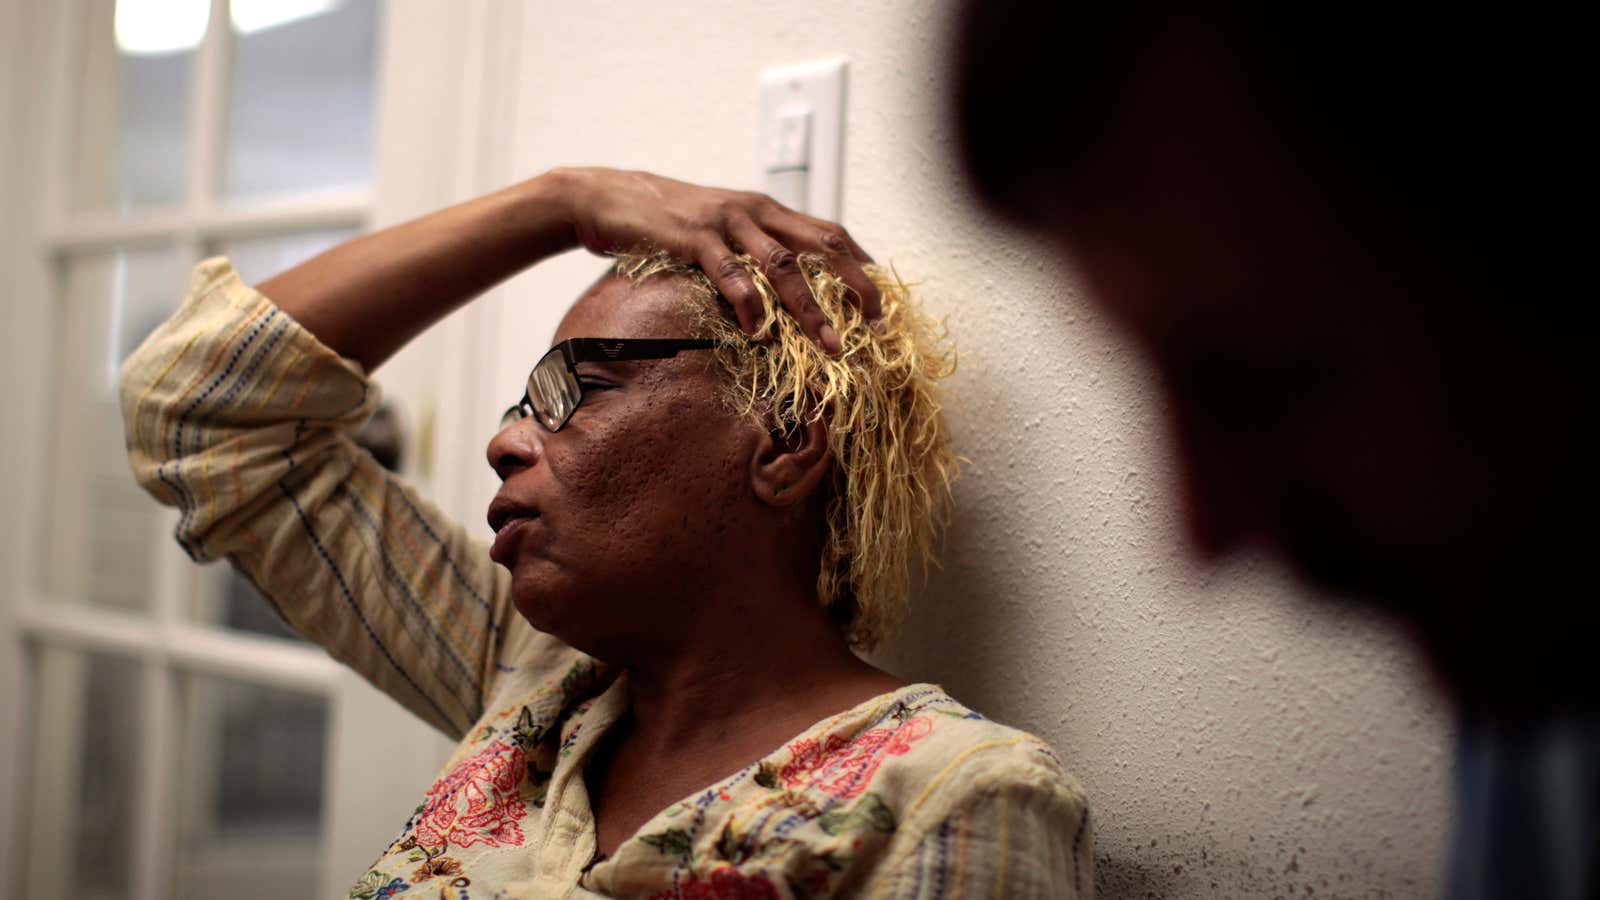 A woman waits outside a doctor’s office to receive treatment for her migraine.